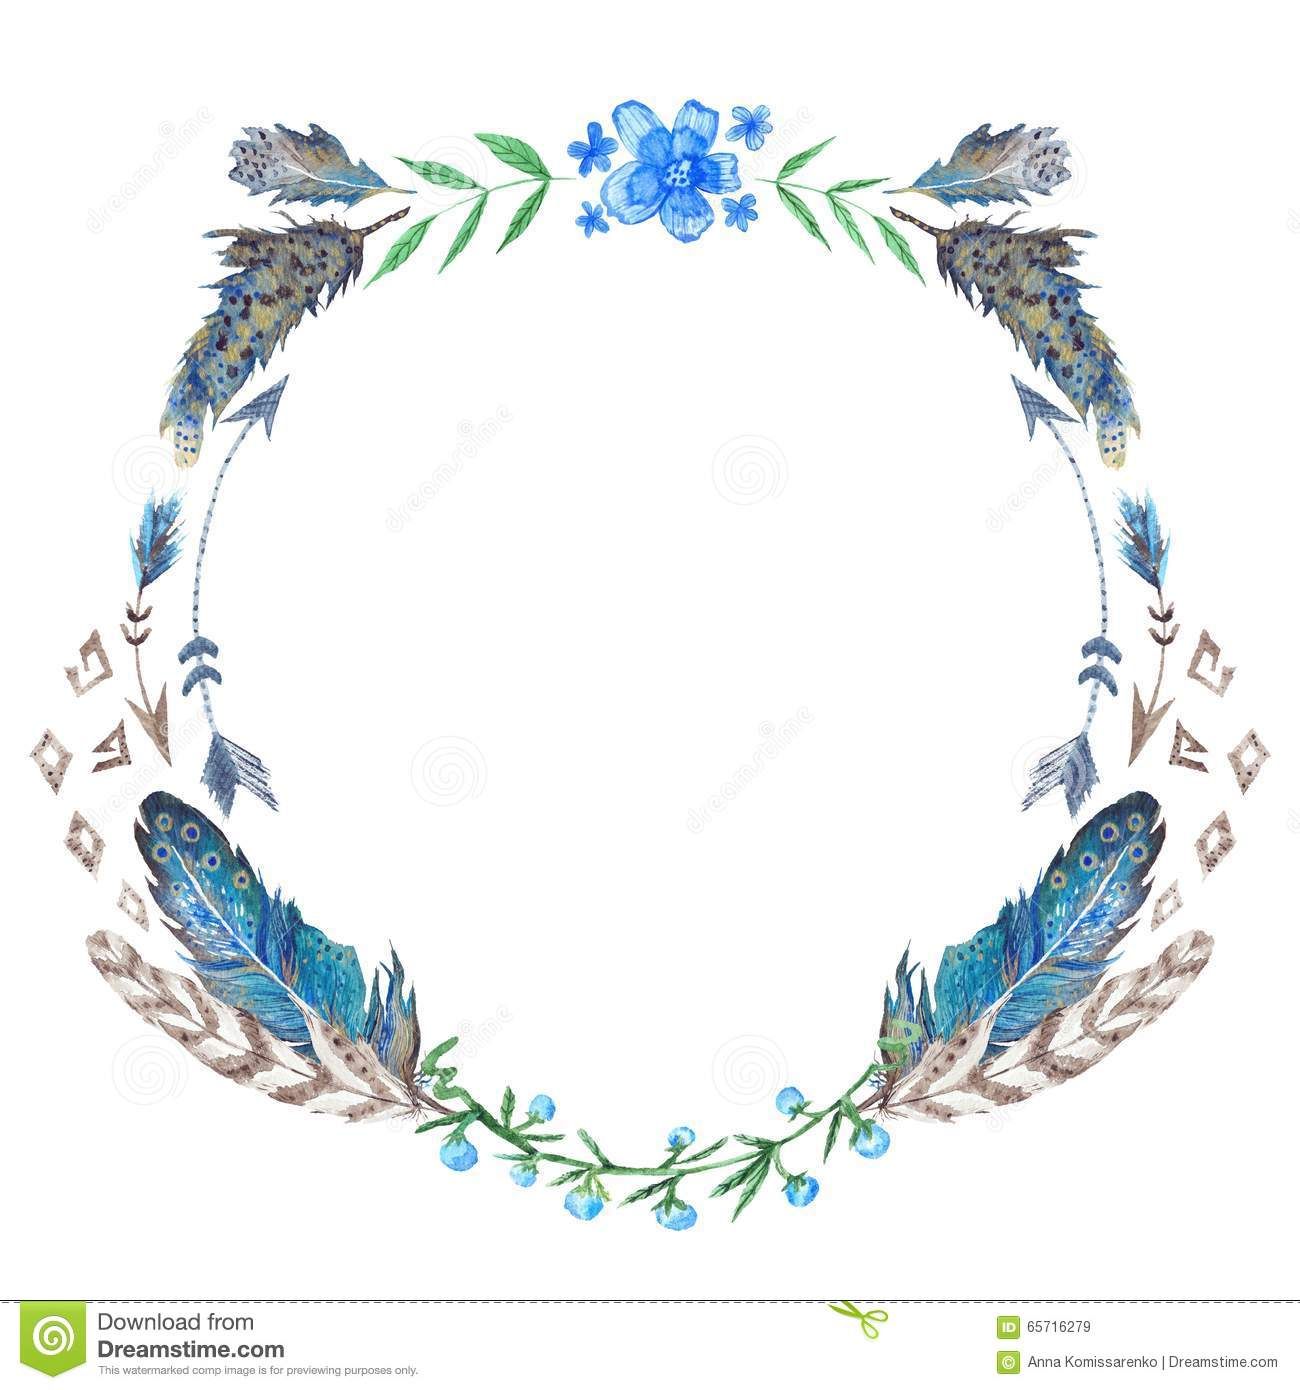 Watercolor wreath download from. Boho clipart borders